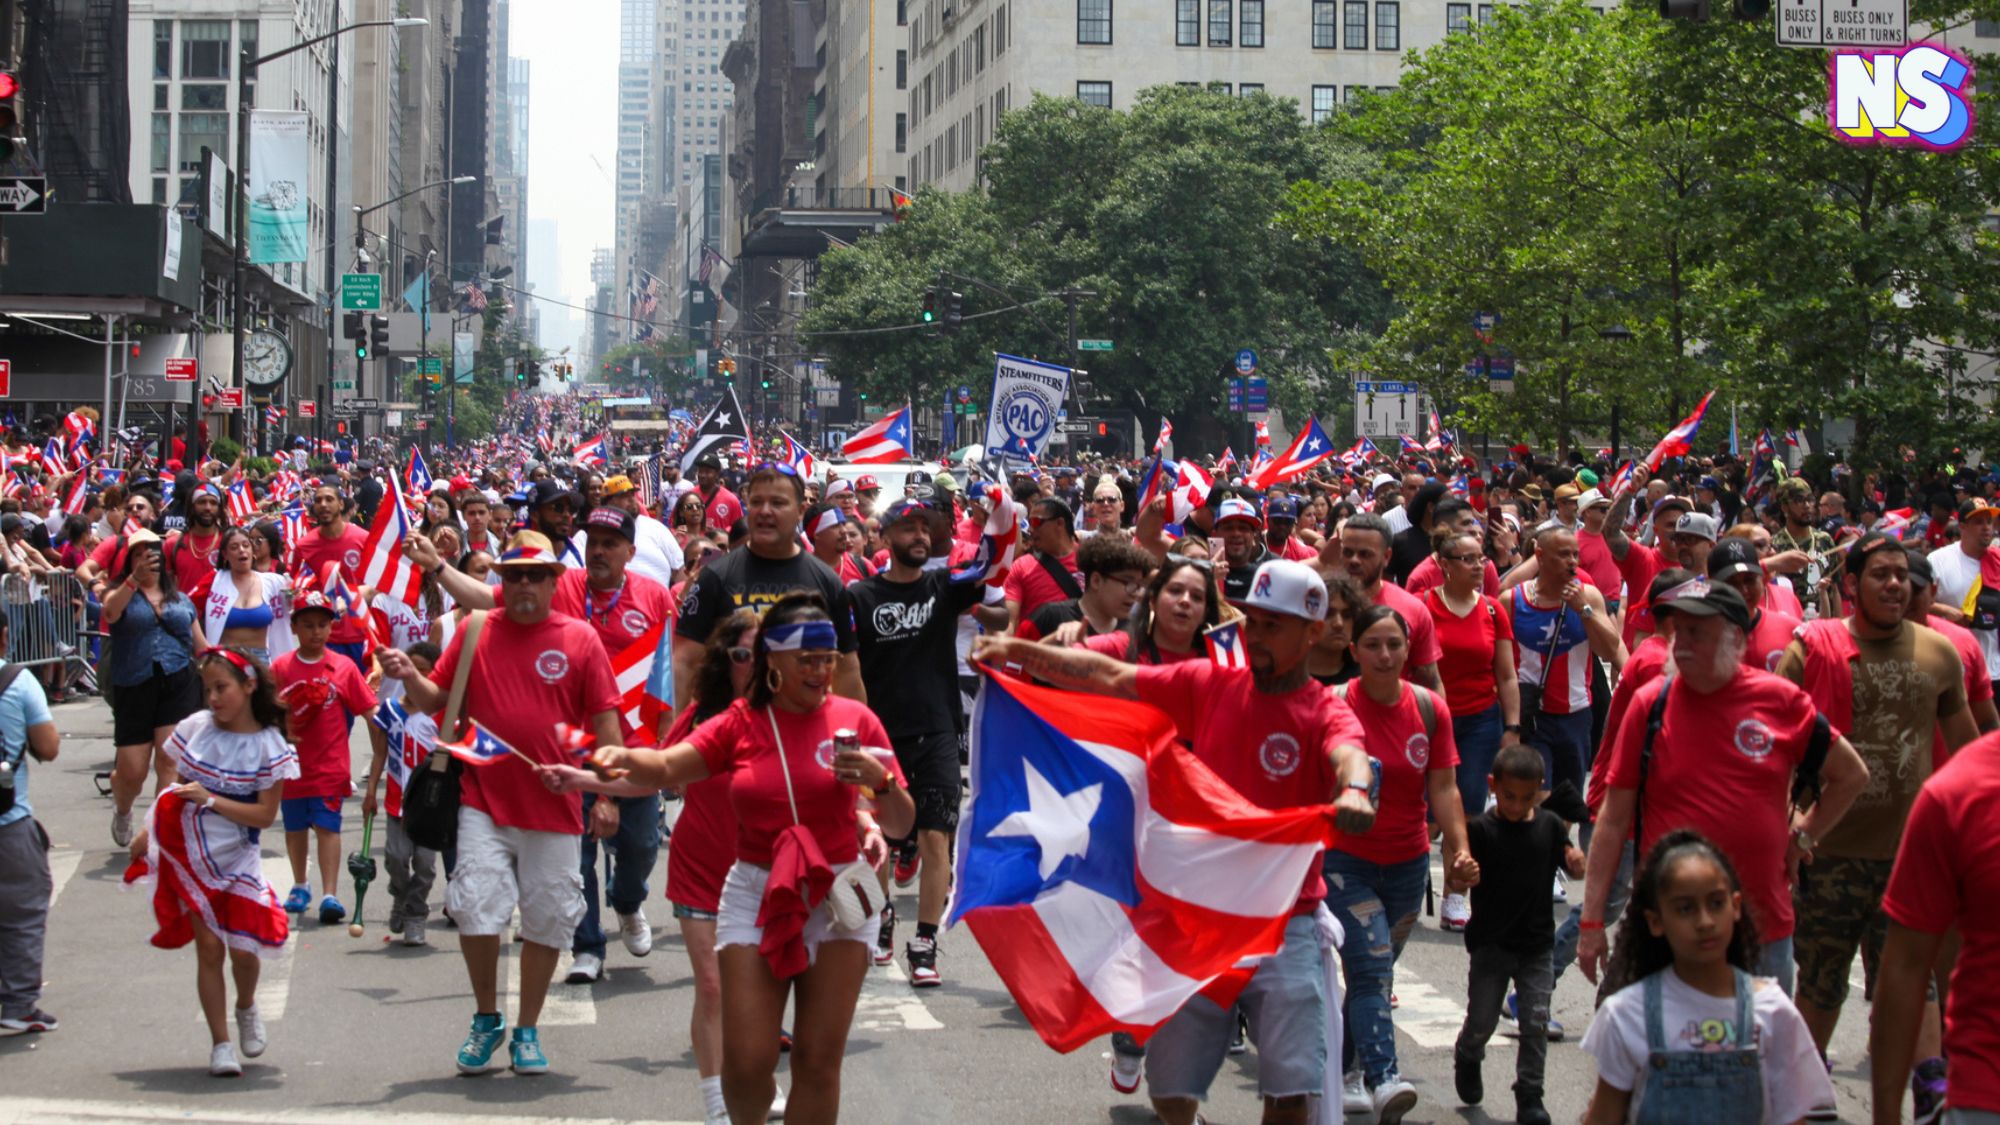 Feature image: National Puerto Rican Day Parade. June 11, 2023, New York, USA: The National Puerto Rican Day Parade which is the largest demonstration of cultural pride takes place on 5th Avenue in New York with people lining up the avenue dancing and cheering — Photo by thenews2.com; courtesy of DepositPhotos.